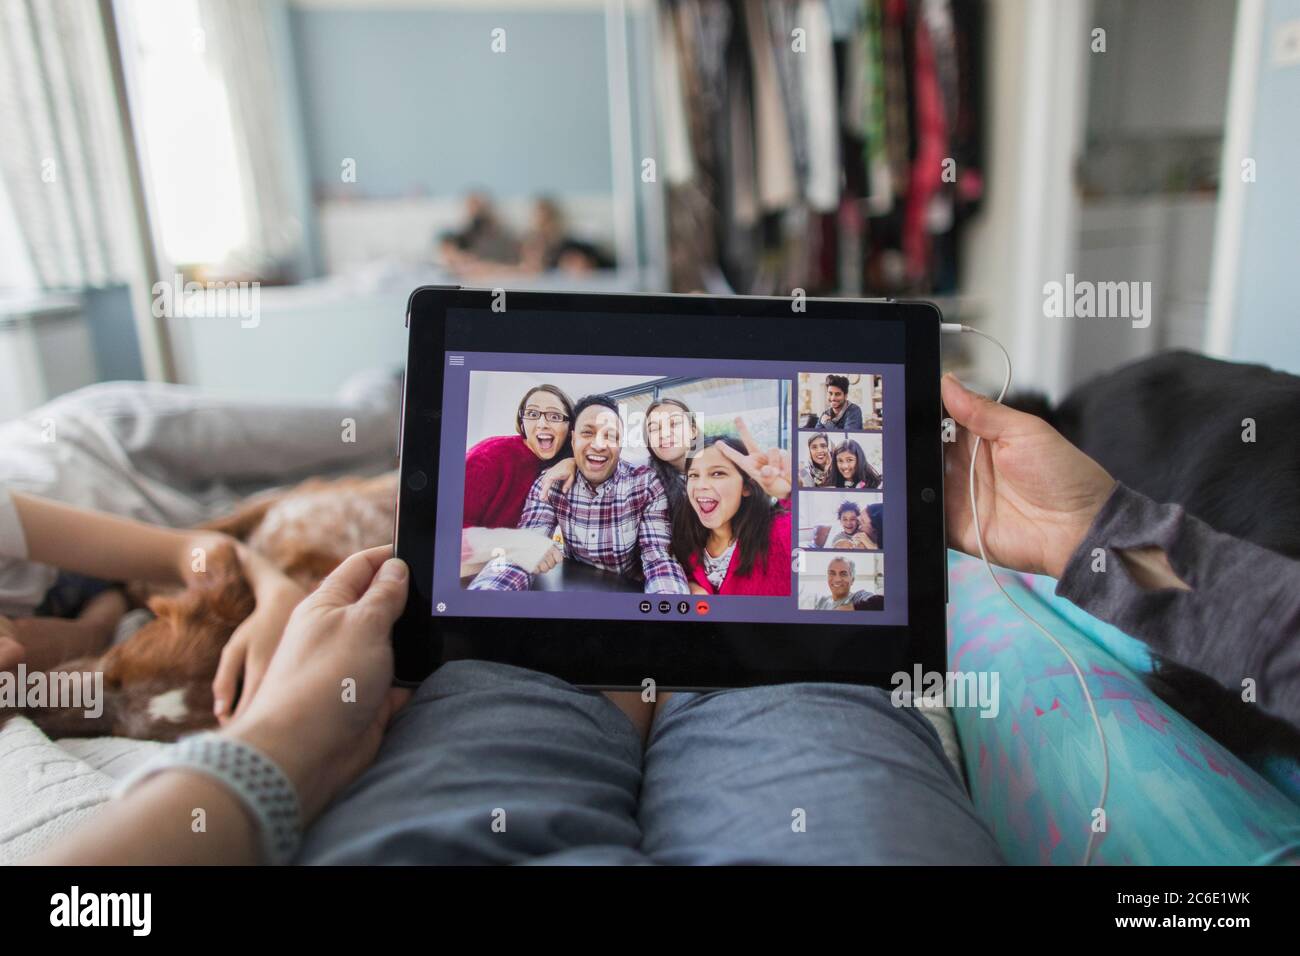 POV woman with digital tablet video chatting with friends on bed Stock Photo